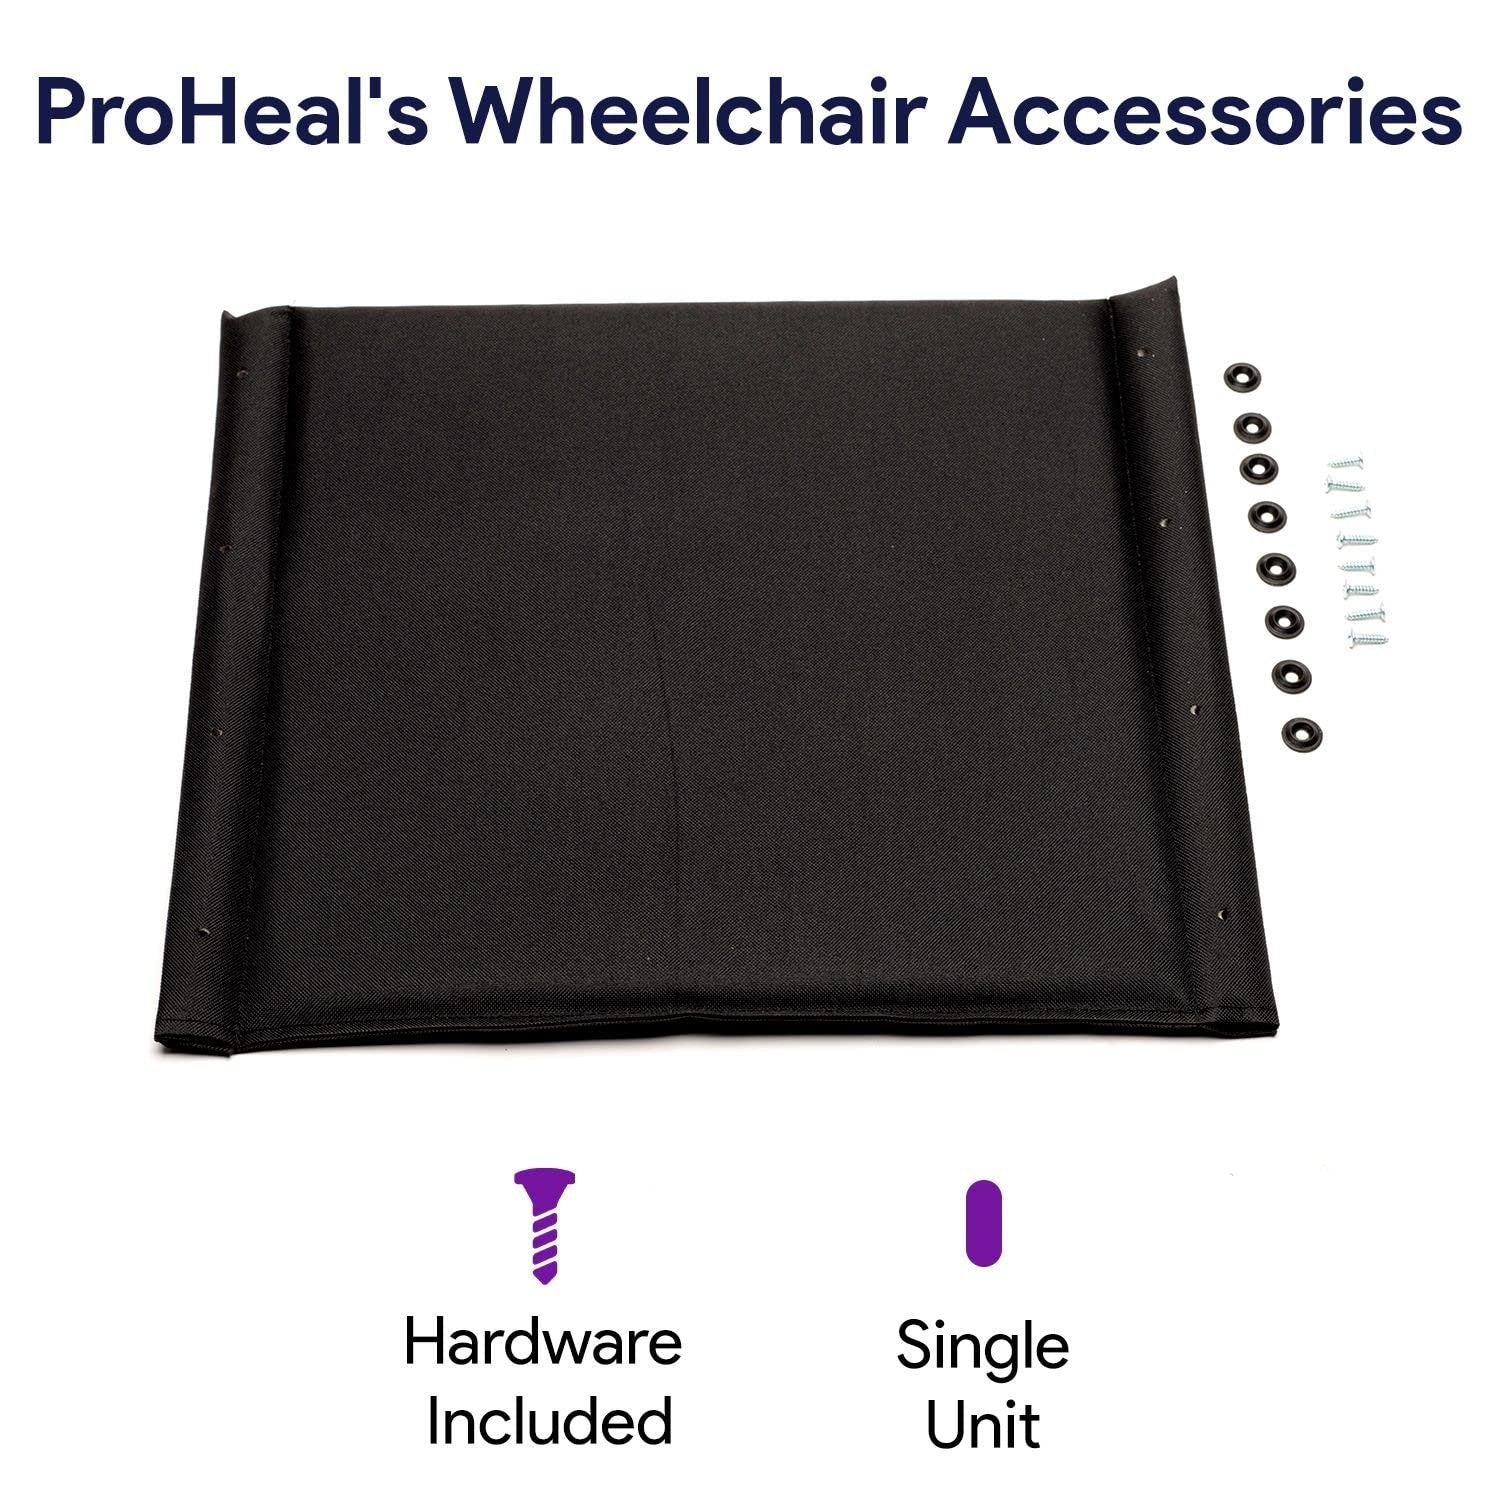 Nylon Wheelchair Seat Replacement - Upholstery Wheelchair Seats Replacements for 16" Chair - Comfortable and Supportive Padded Seat for Wheelchair - K3